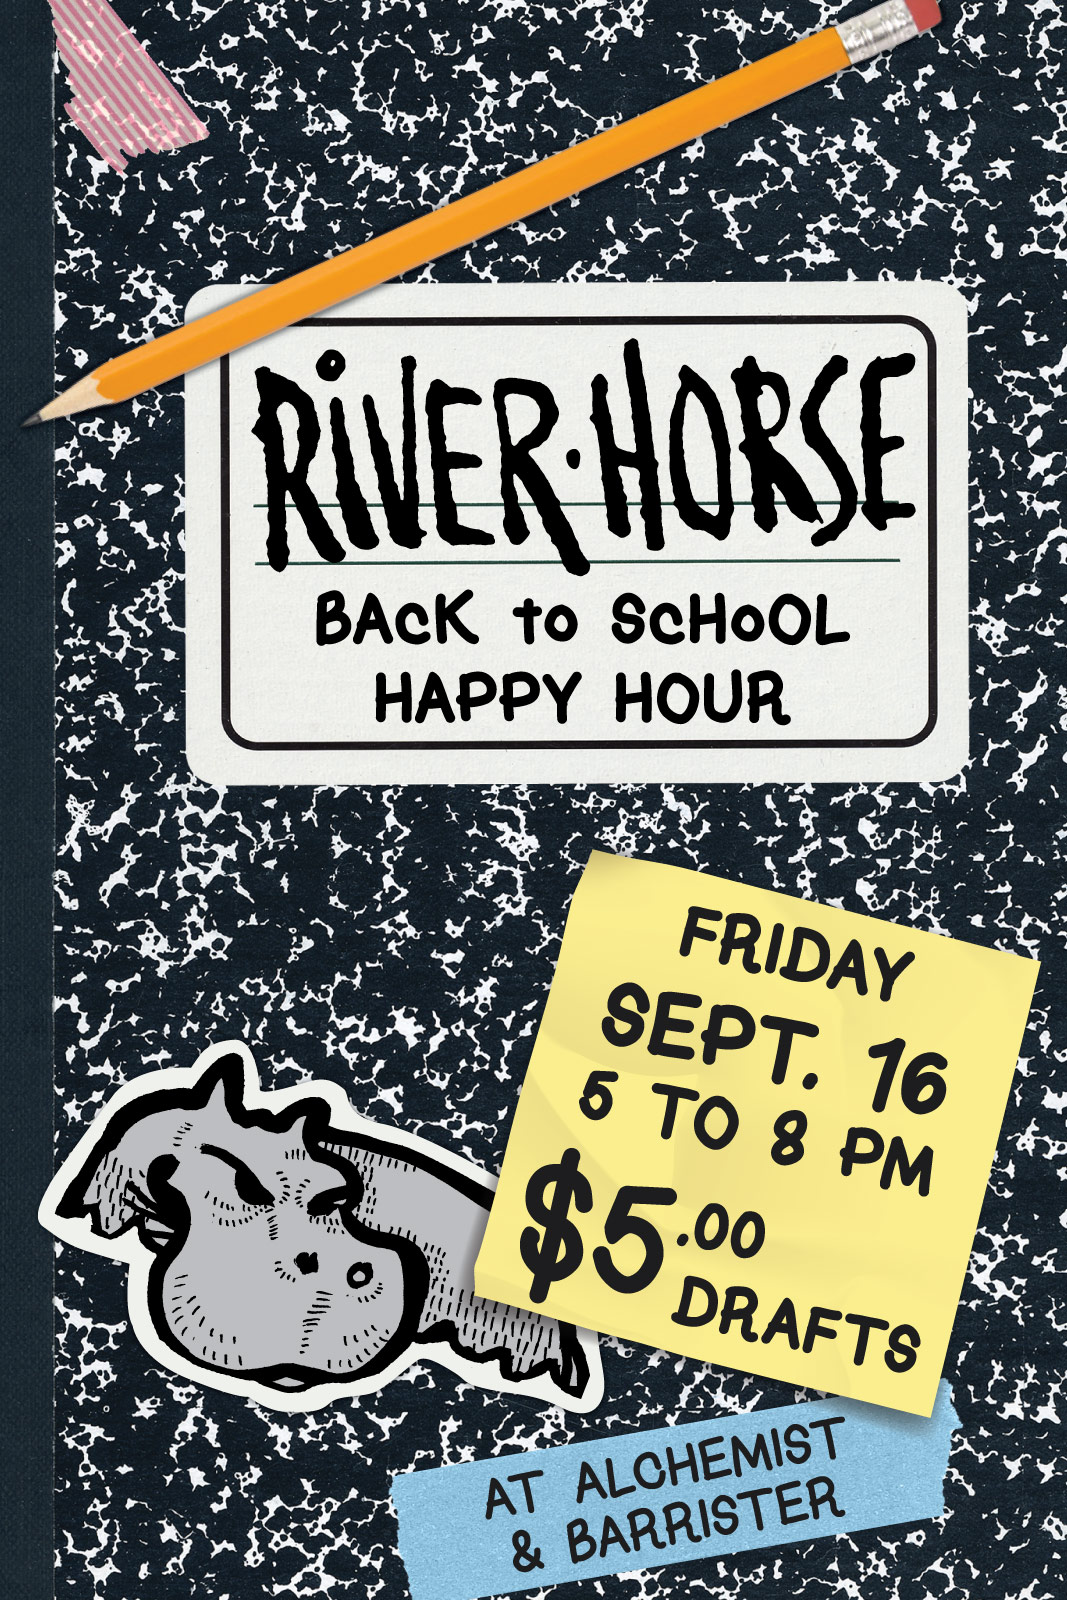 alchemist-and-barrister_river-horse-back-to-school-happy-hour-posters_08-19-16